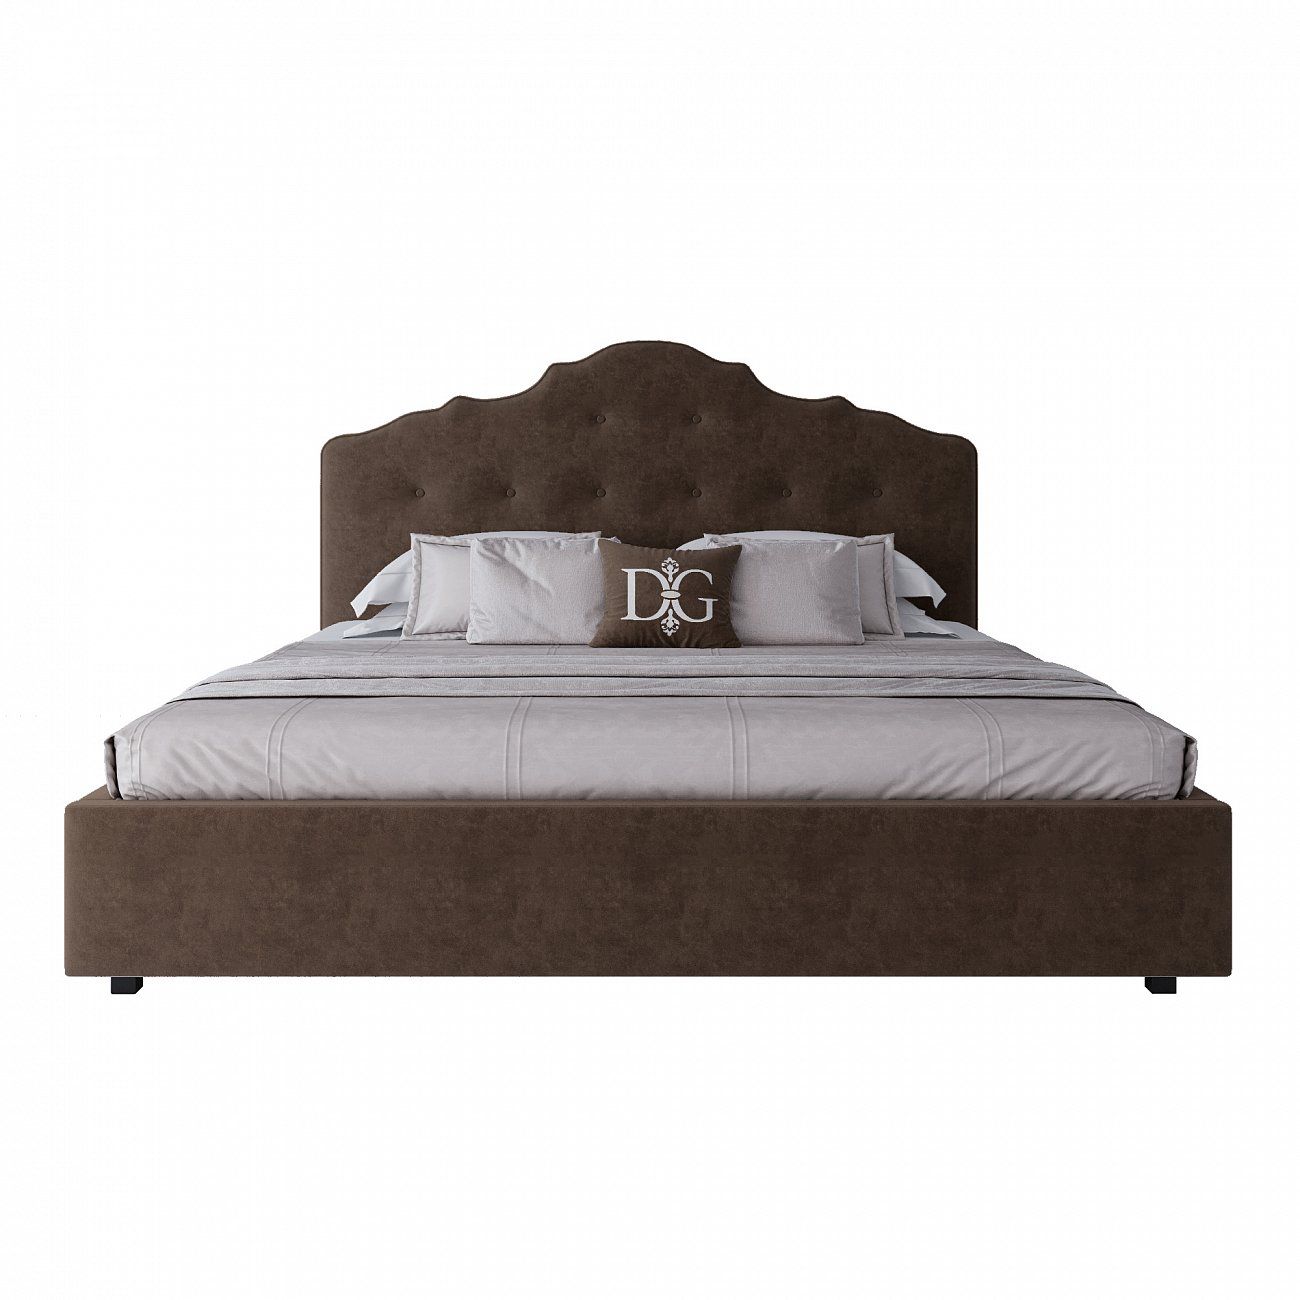 Euro bed with upholstered headboard 200x200 cm brown Palace